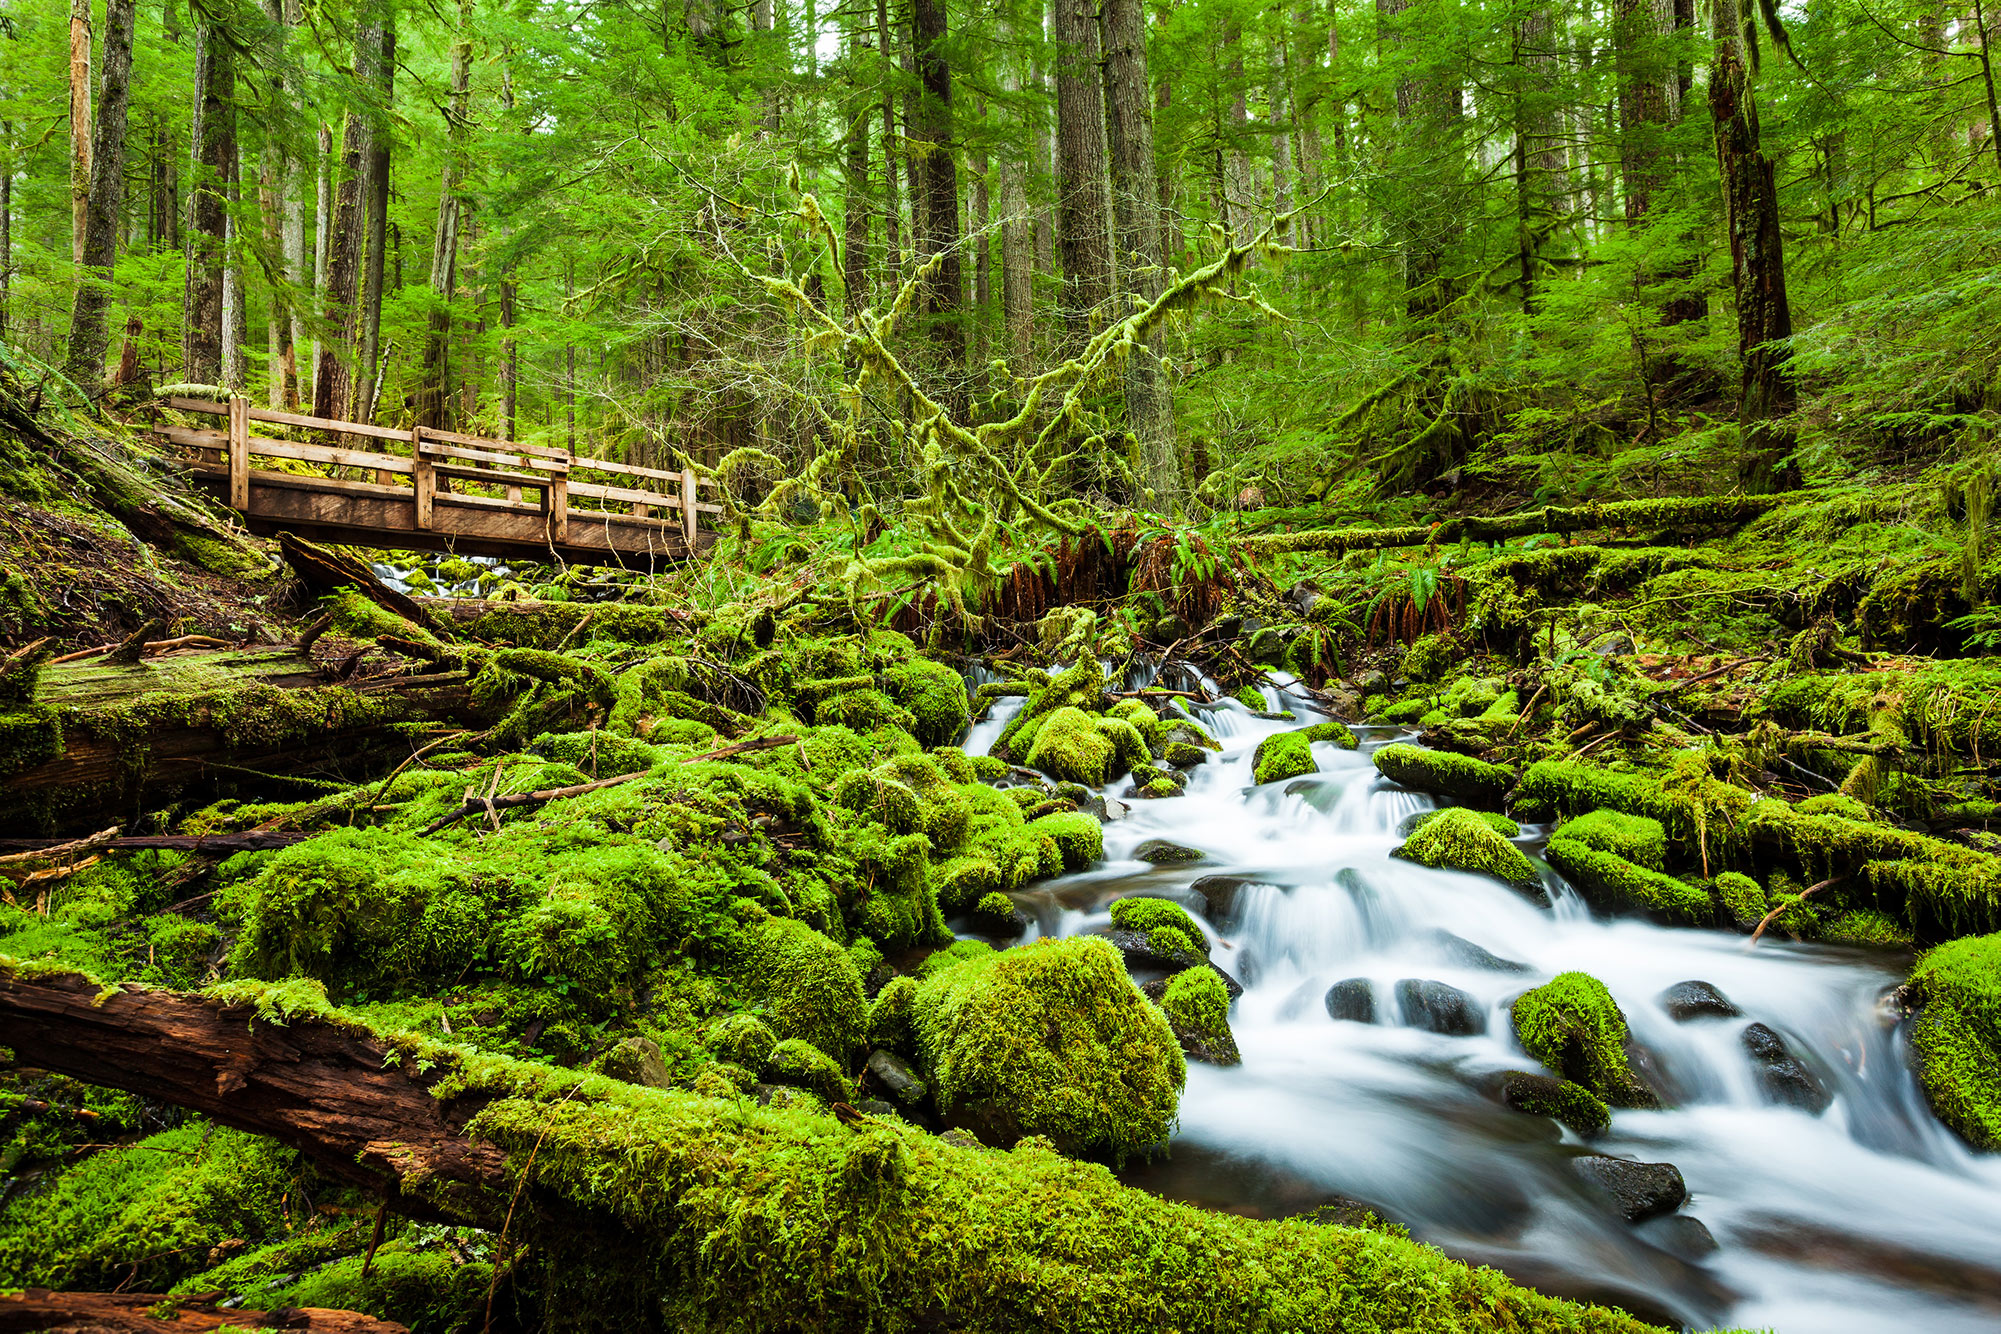 Temperate Rain Forests - Olympic National Park (U.S. National Park